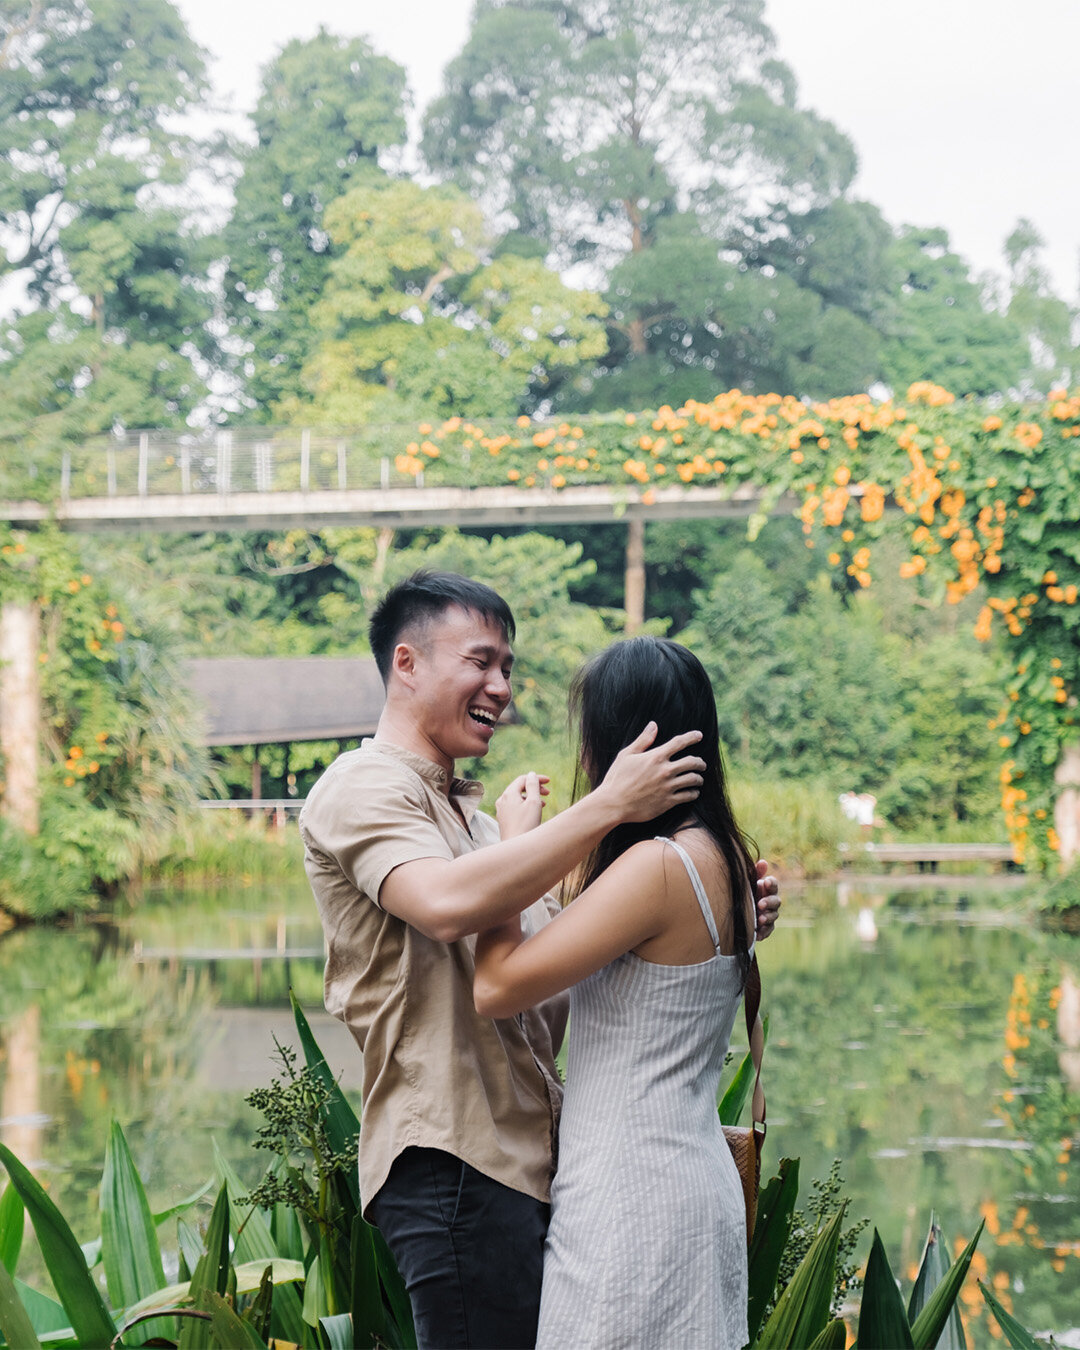 Weeks ago, we received a request to photograph and video a surprise proposal and of course we said yes (pun intended)! From the first site recce to see where we could hide amongst the trees, to coming up with suggestions on how to mic our male lead u